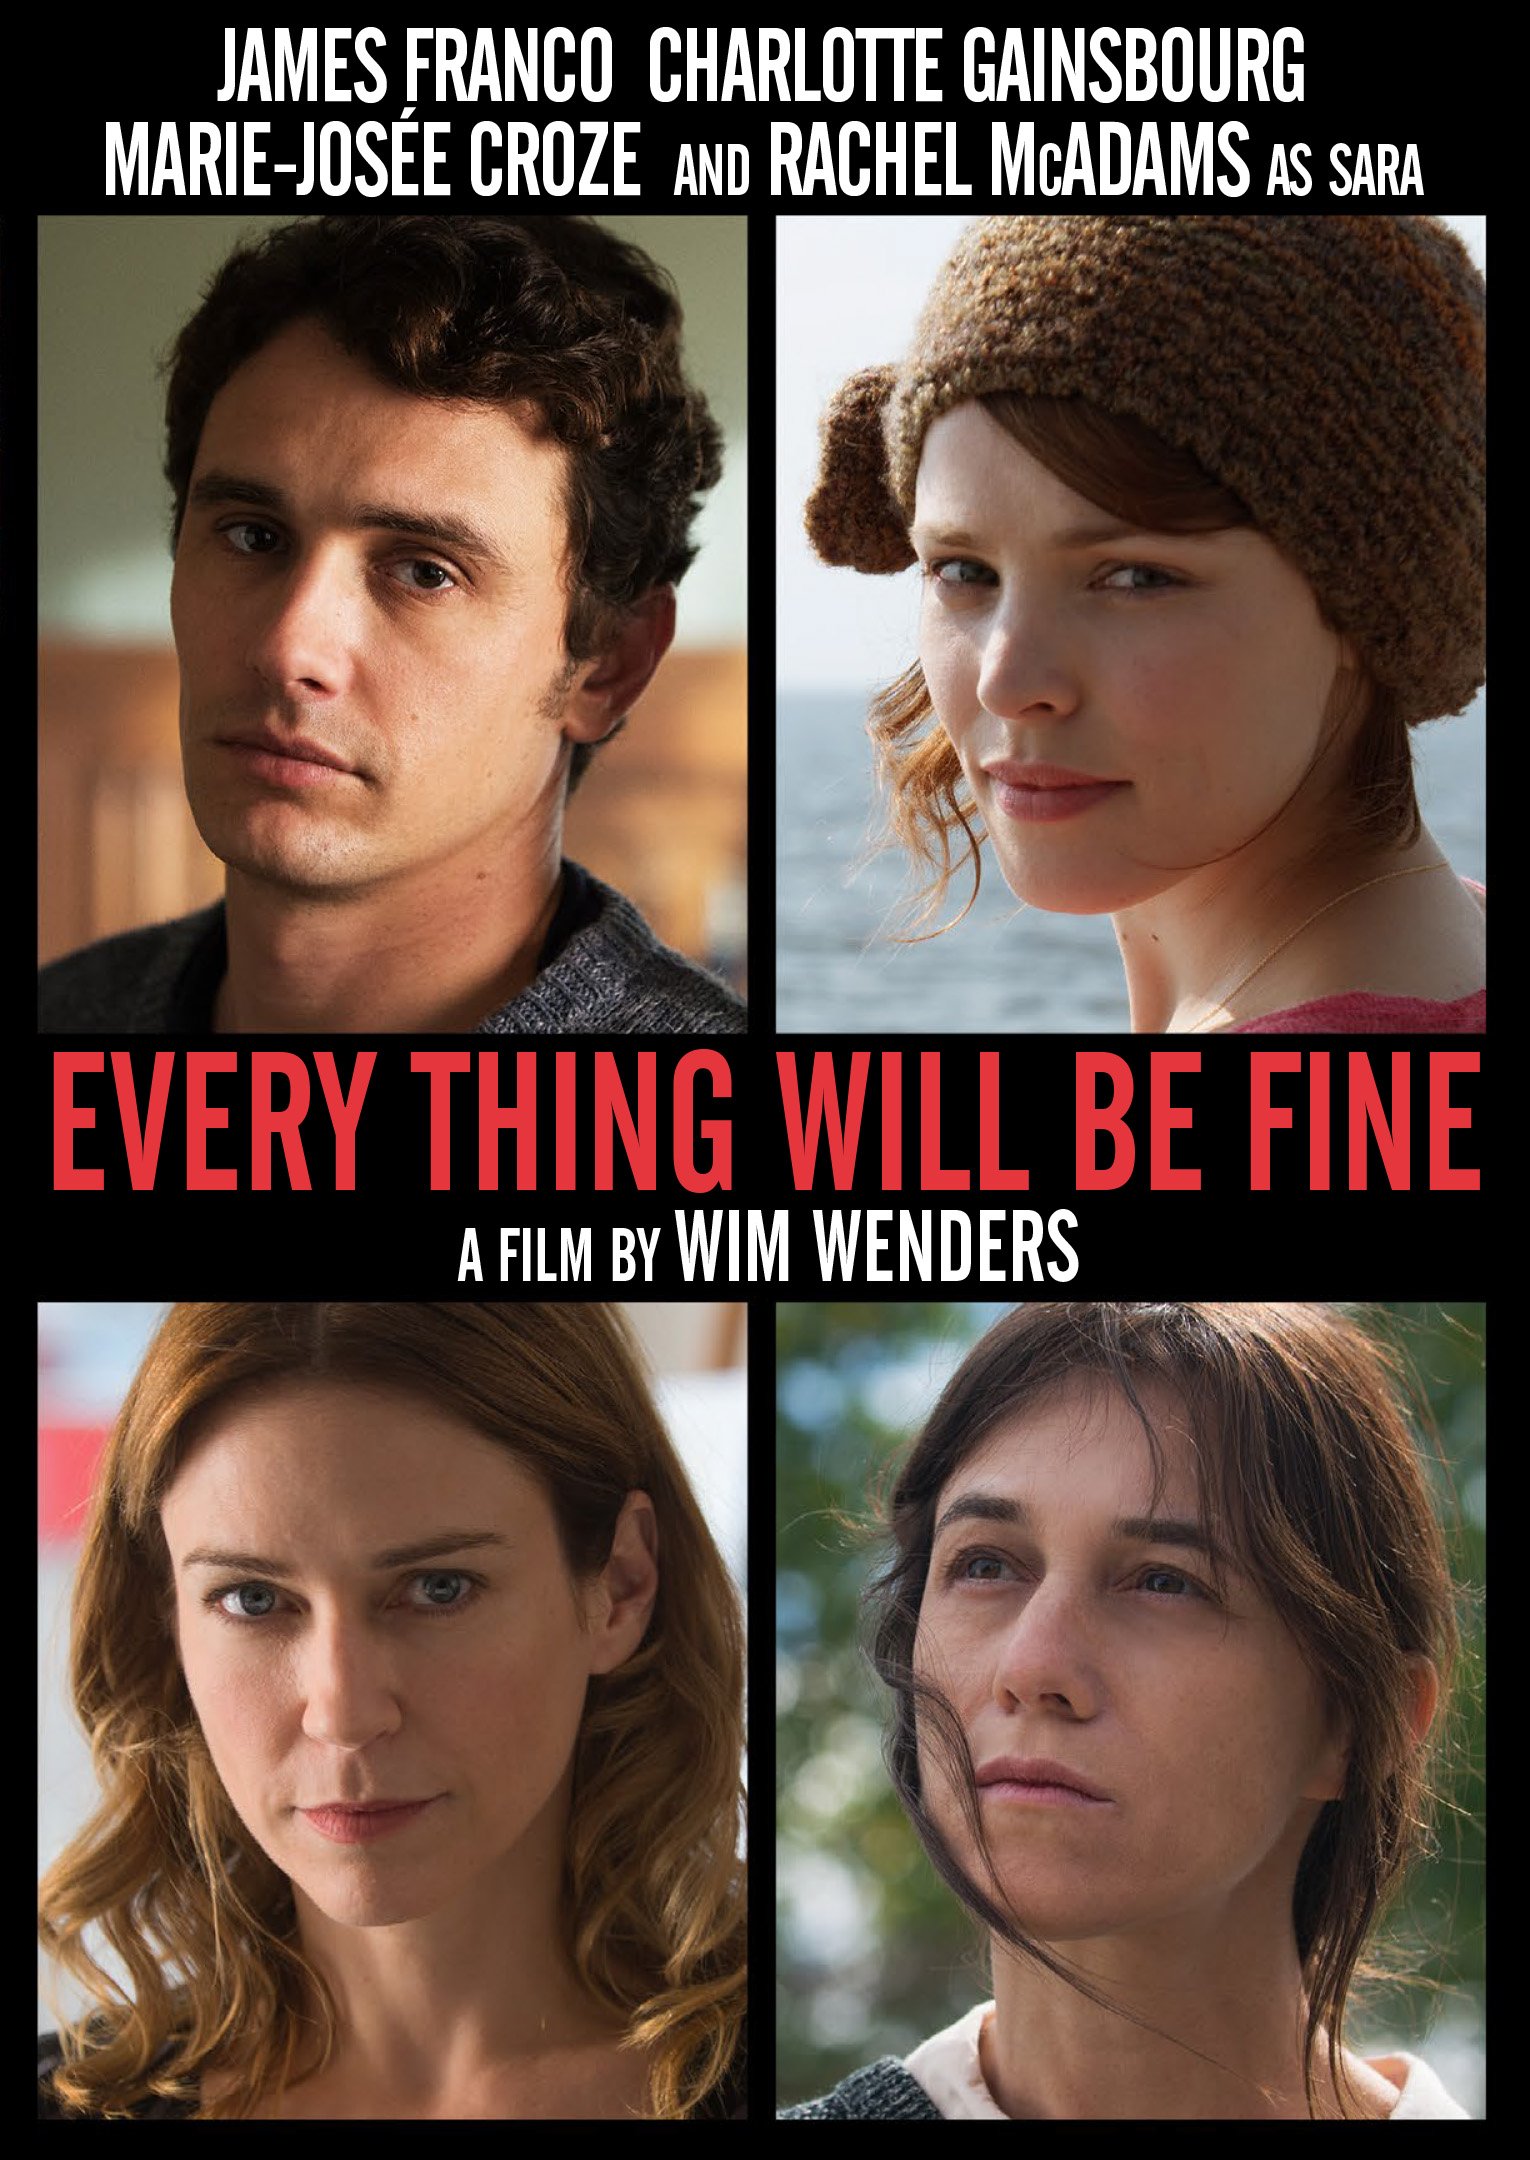 Every Thing Will Be Fine DVD Release Date June 7, 2016